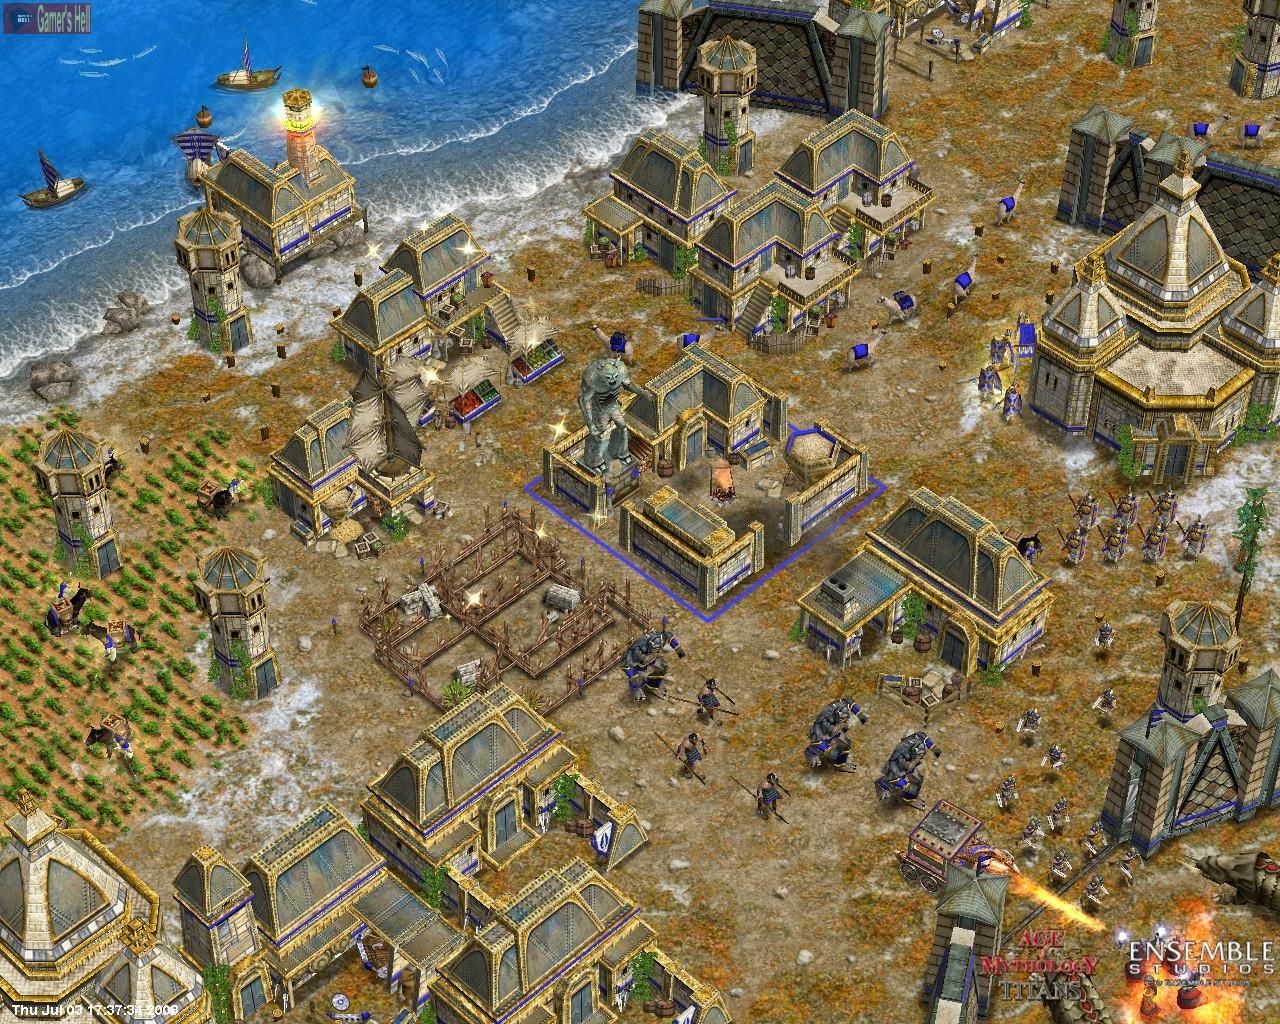 Age of mythology extended edition download